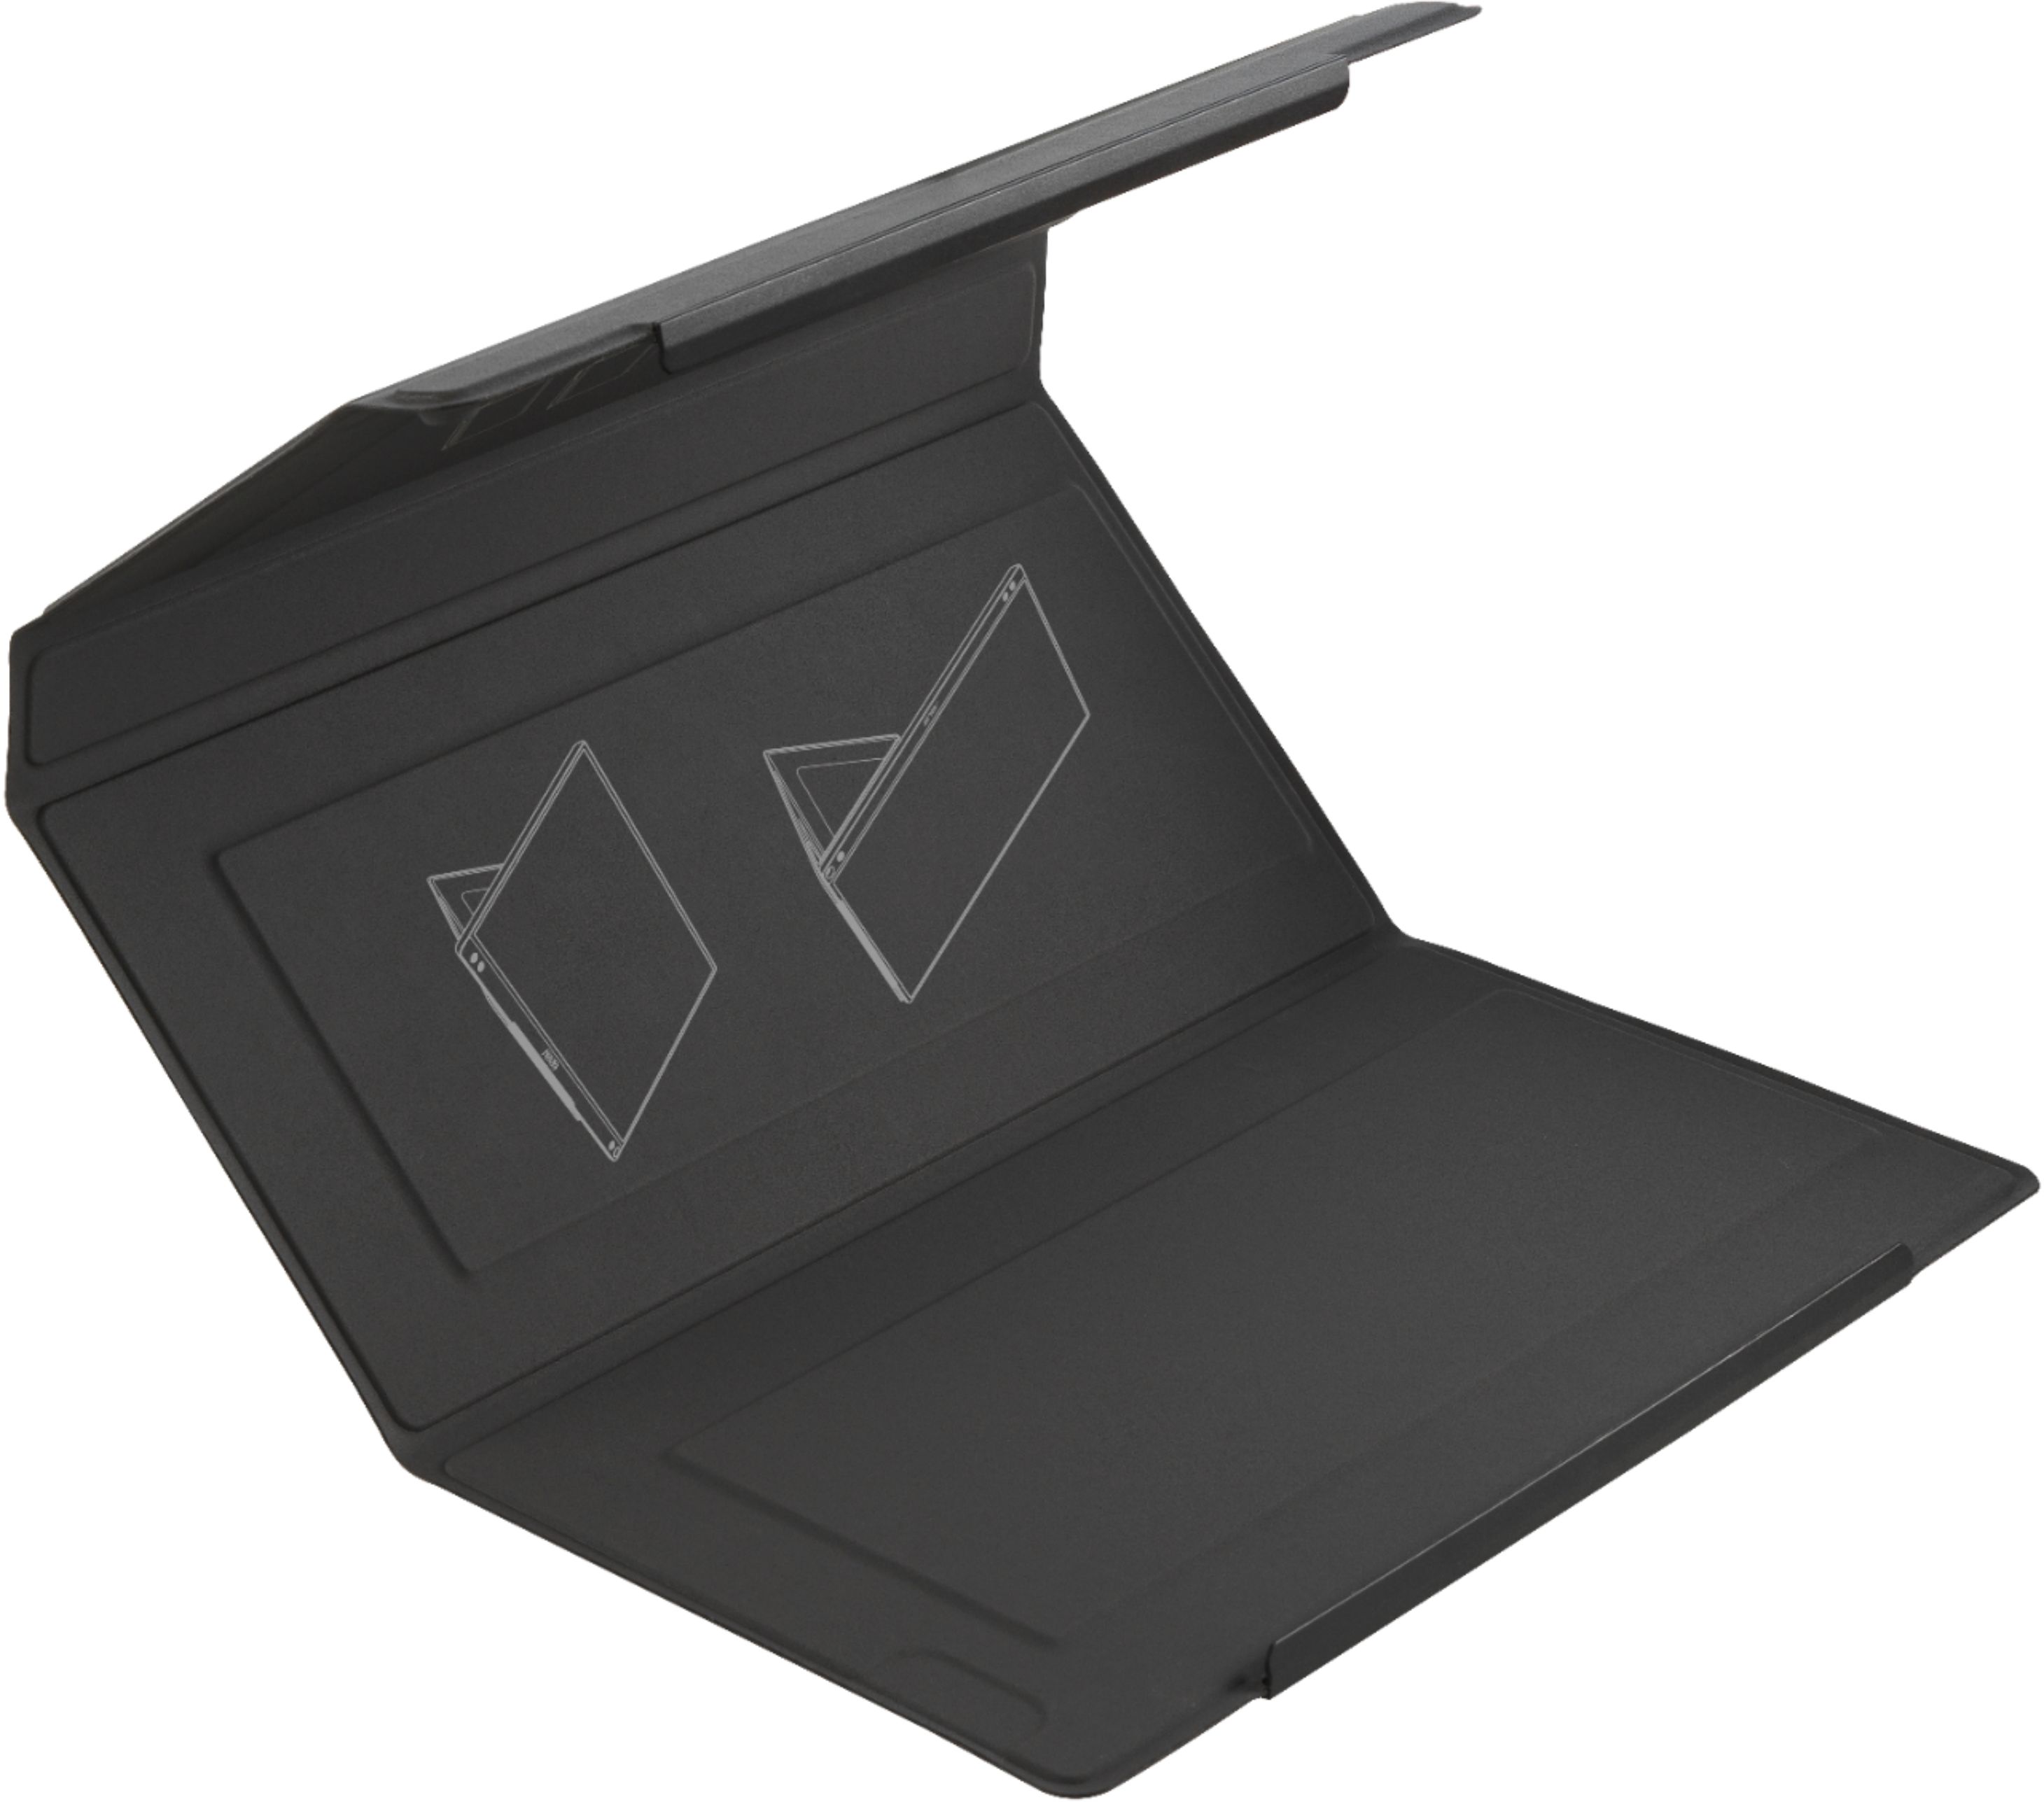 ASUS ZenScreen 15.6” IPS FHD 1080P USB Type-C Portable Monitor with  Foldable Smart Case Dark Gray MB16ACE - Best Buy